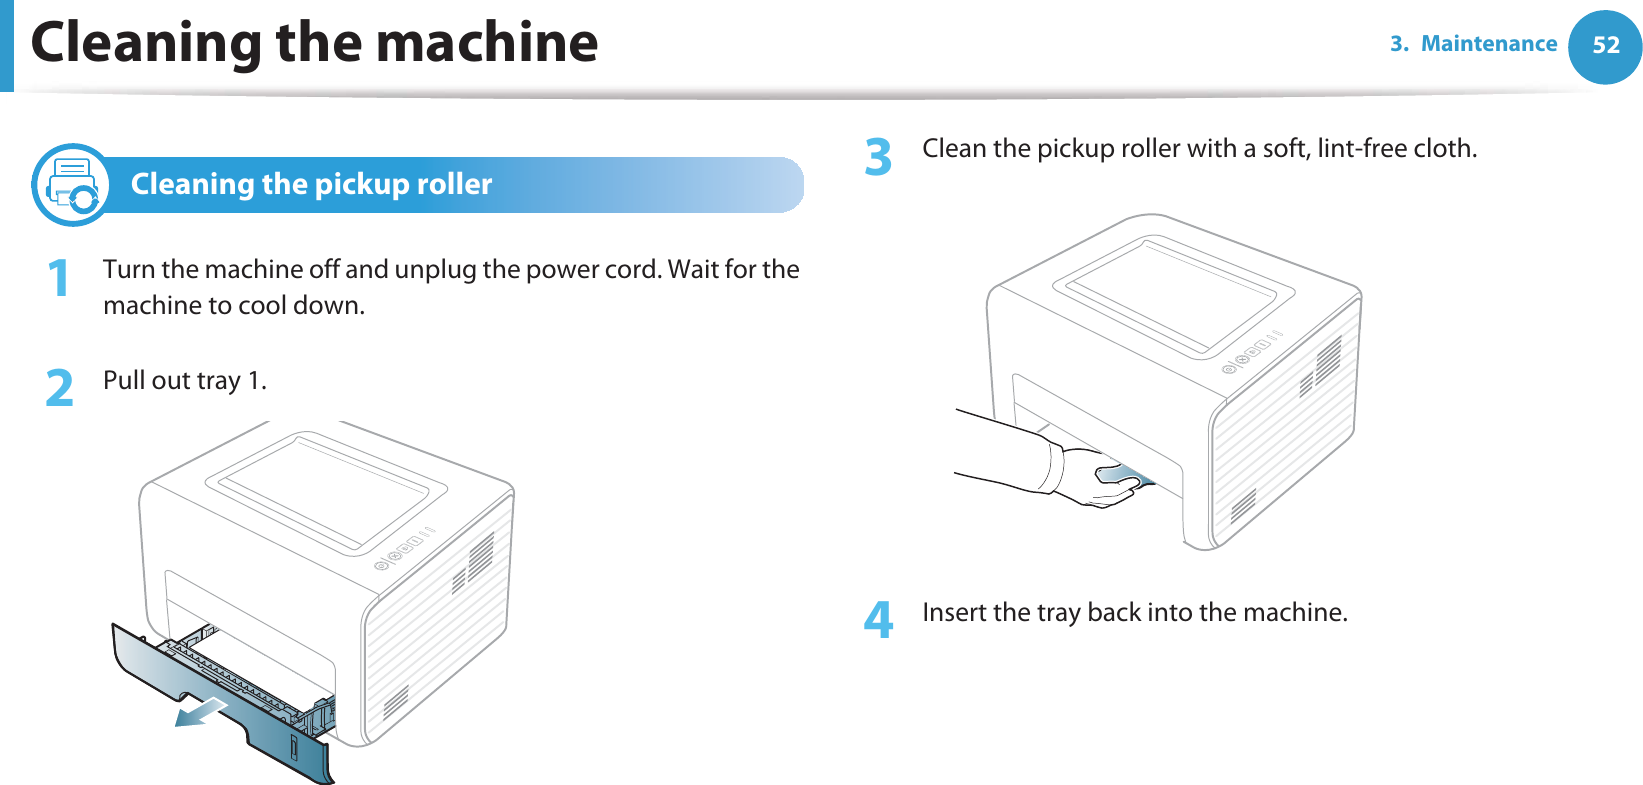 Cleaning the machine 523. Maintenance3 Cleaning the pickup roller1Turn the machine off and unplug the power cord. Wait for the machine to cool down.2  Pull out tray 1.3  Clean the pickup roller with a soft, lint-free cloth.4  Insert the tray back into the machine.